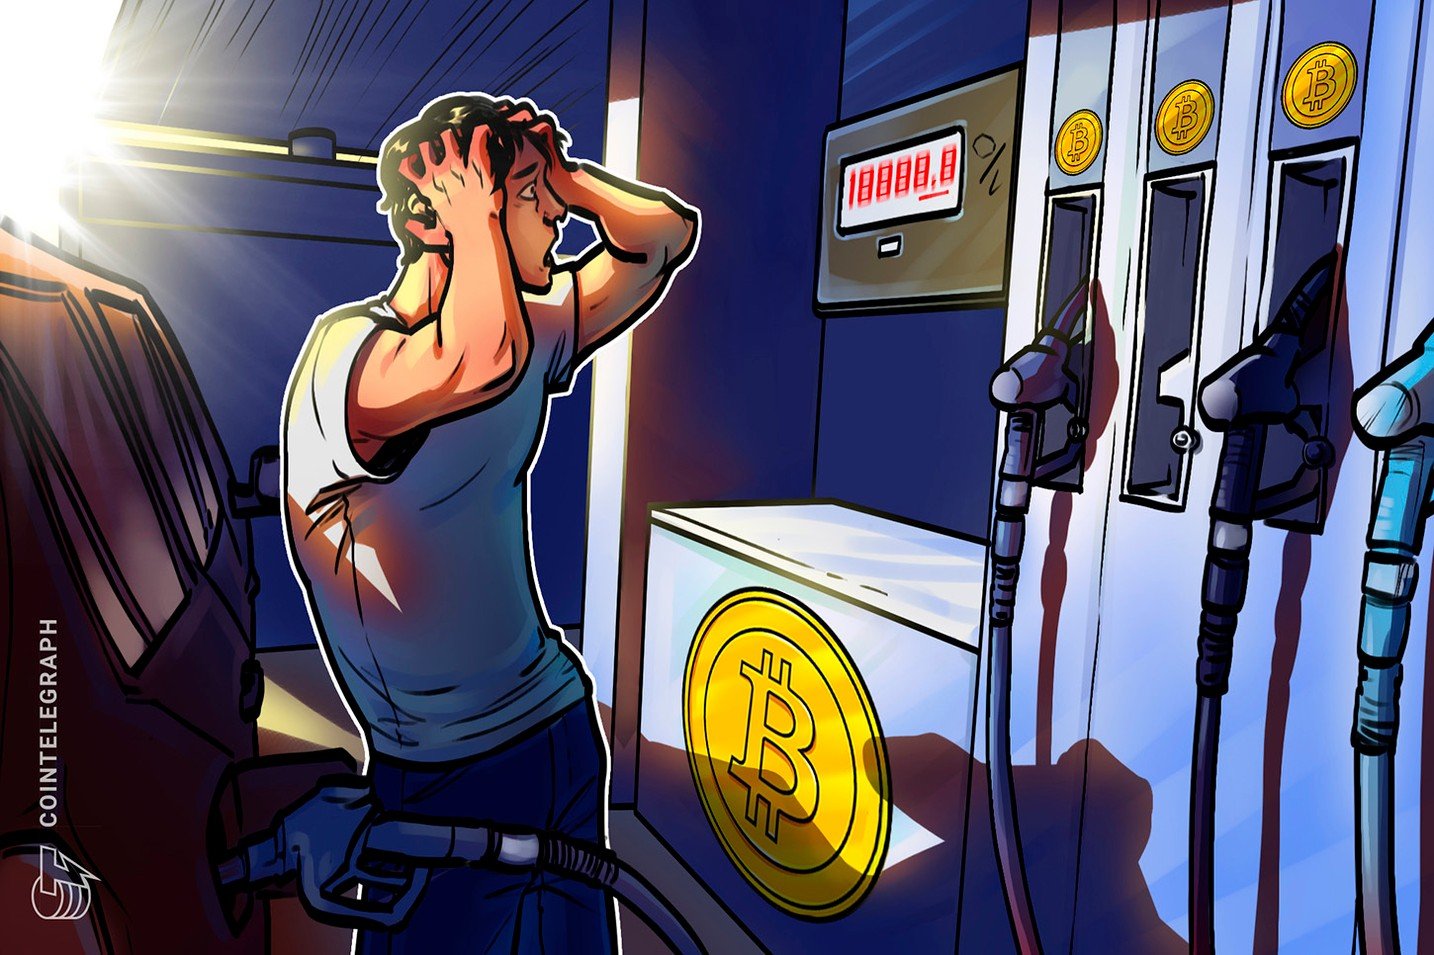 Bitcoin fees hit 20-month high as miner revenues match K BTC price